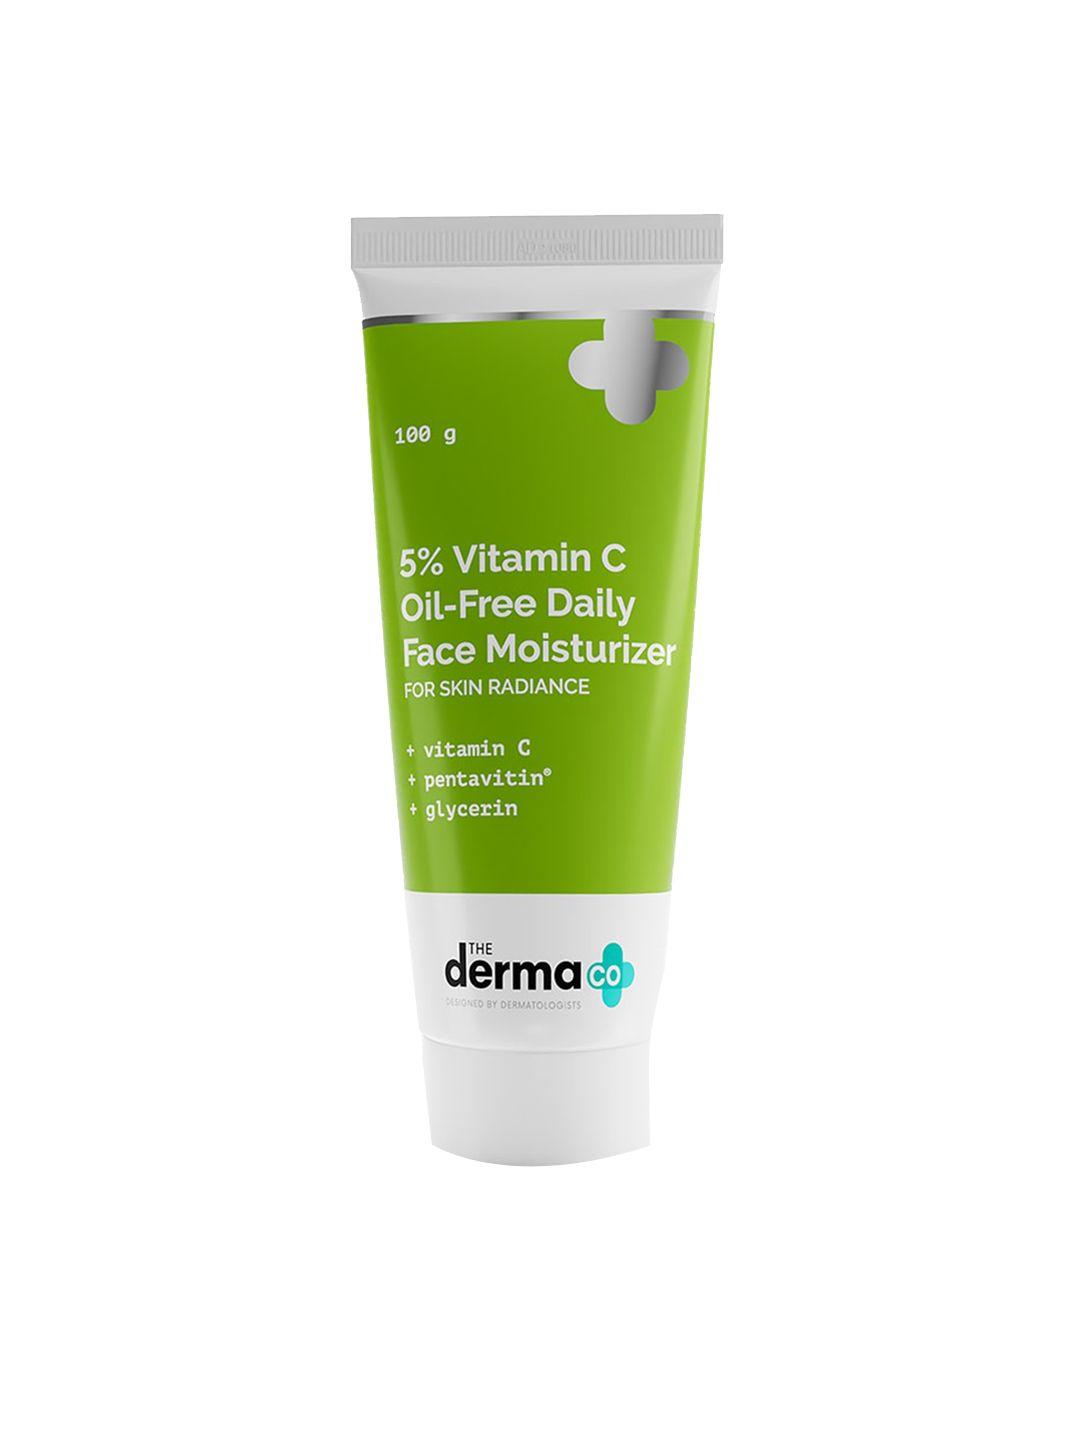 the derma co. 5% vitamin c oil-free daily face moisturizer with pentavitin - 100 g